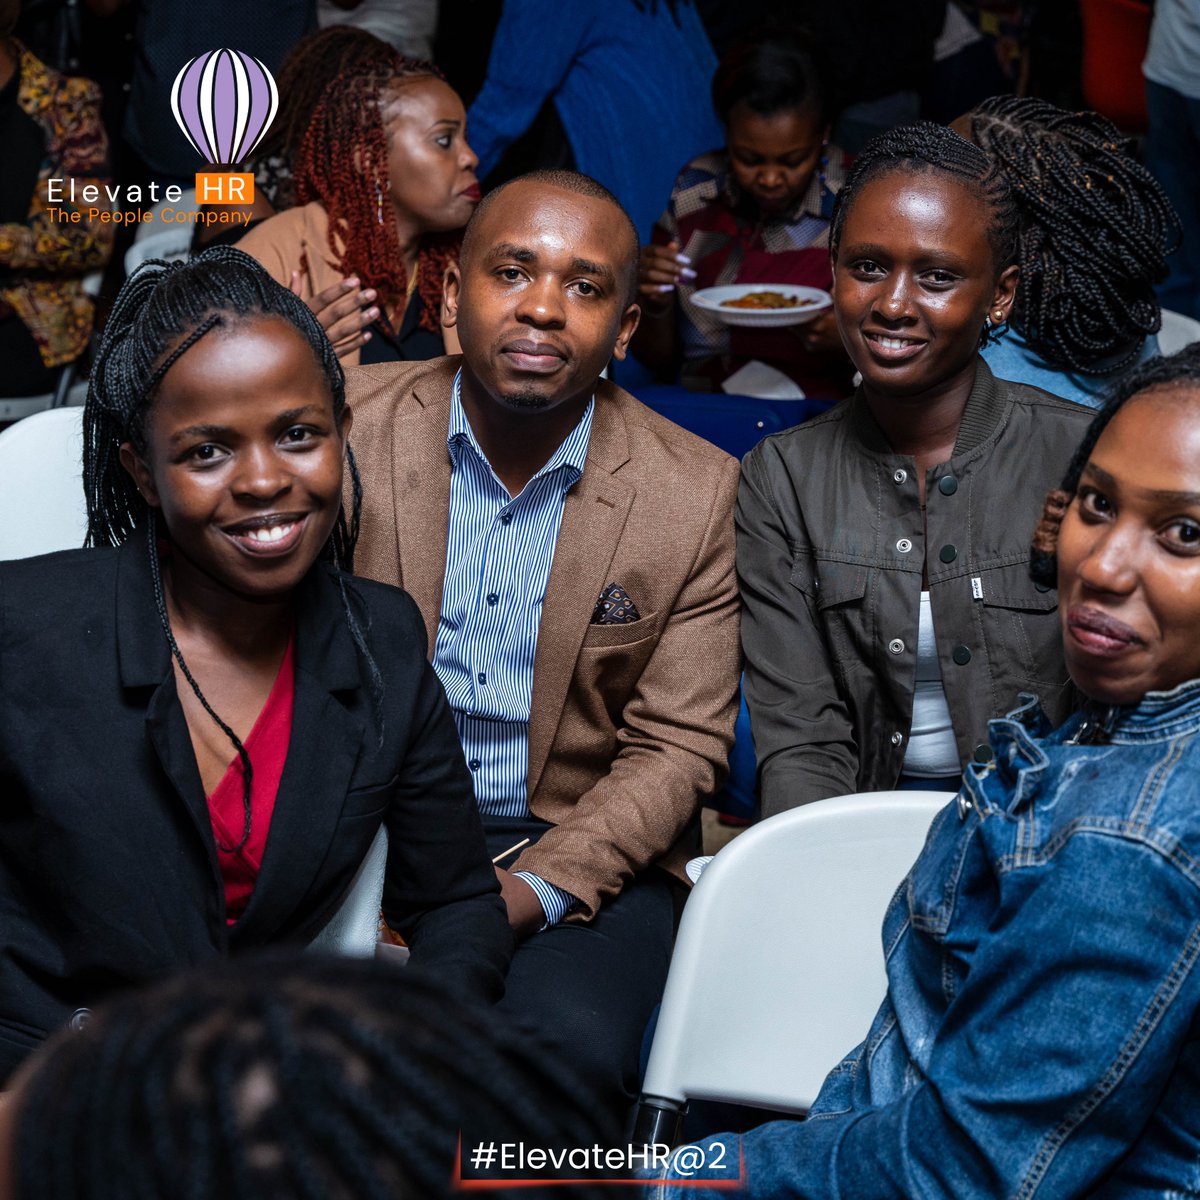 THREAD 3/3

Together, we thrive, championing ElevateHR Africa and fostering connections that #elevates us all. 💫

If you want to be part of our Innovation-Driven HR Community, follow this link 👉community.elevatehr.co

#ElevateHRat2 #ElevateHRAnniversary #ThePeopleCompany